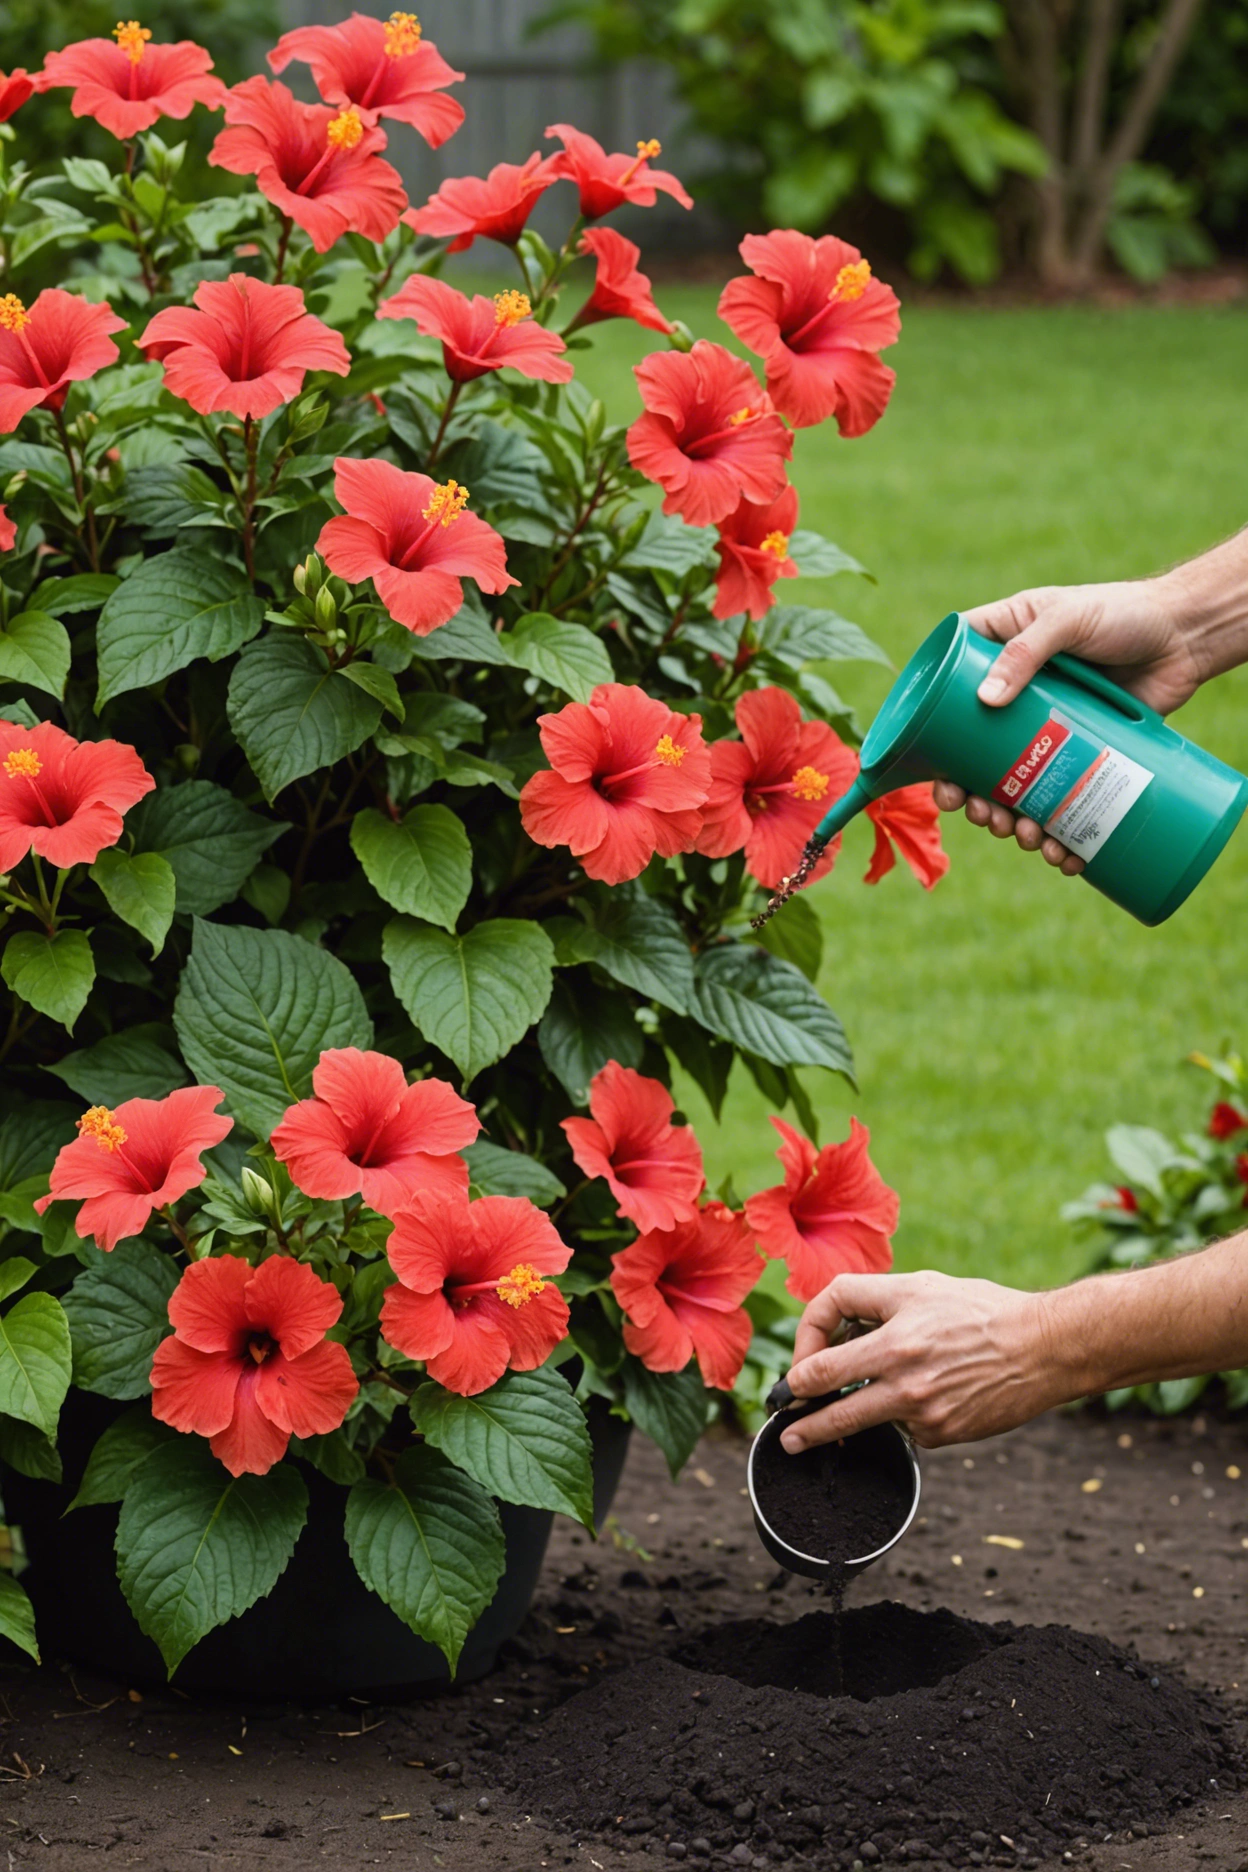 "A hand sprinkling fertilizer on a vibrant hibiscus plant with large blooms, with a bag of hibiscus fertilizer and measuring cup nearby."